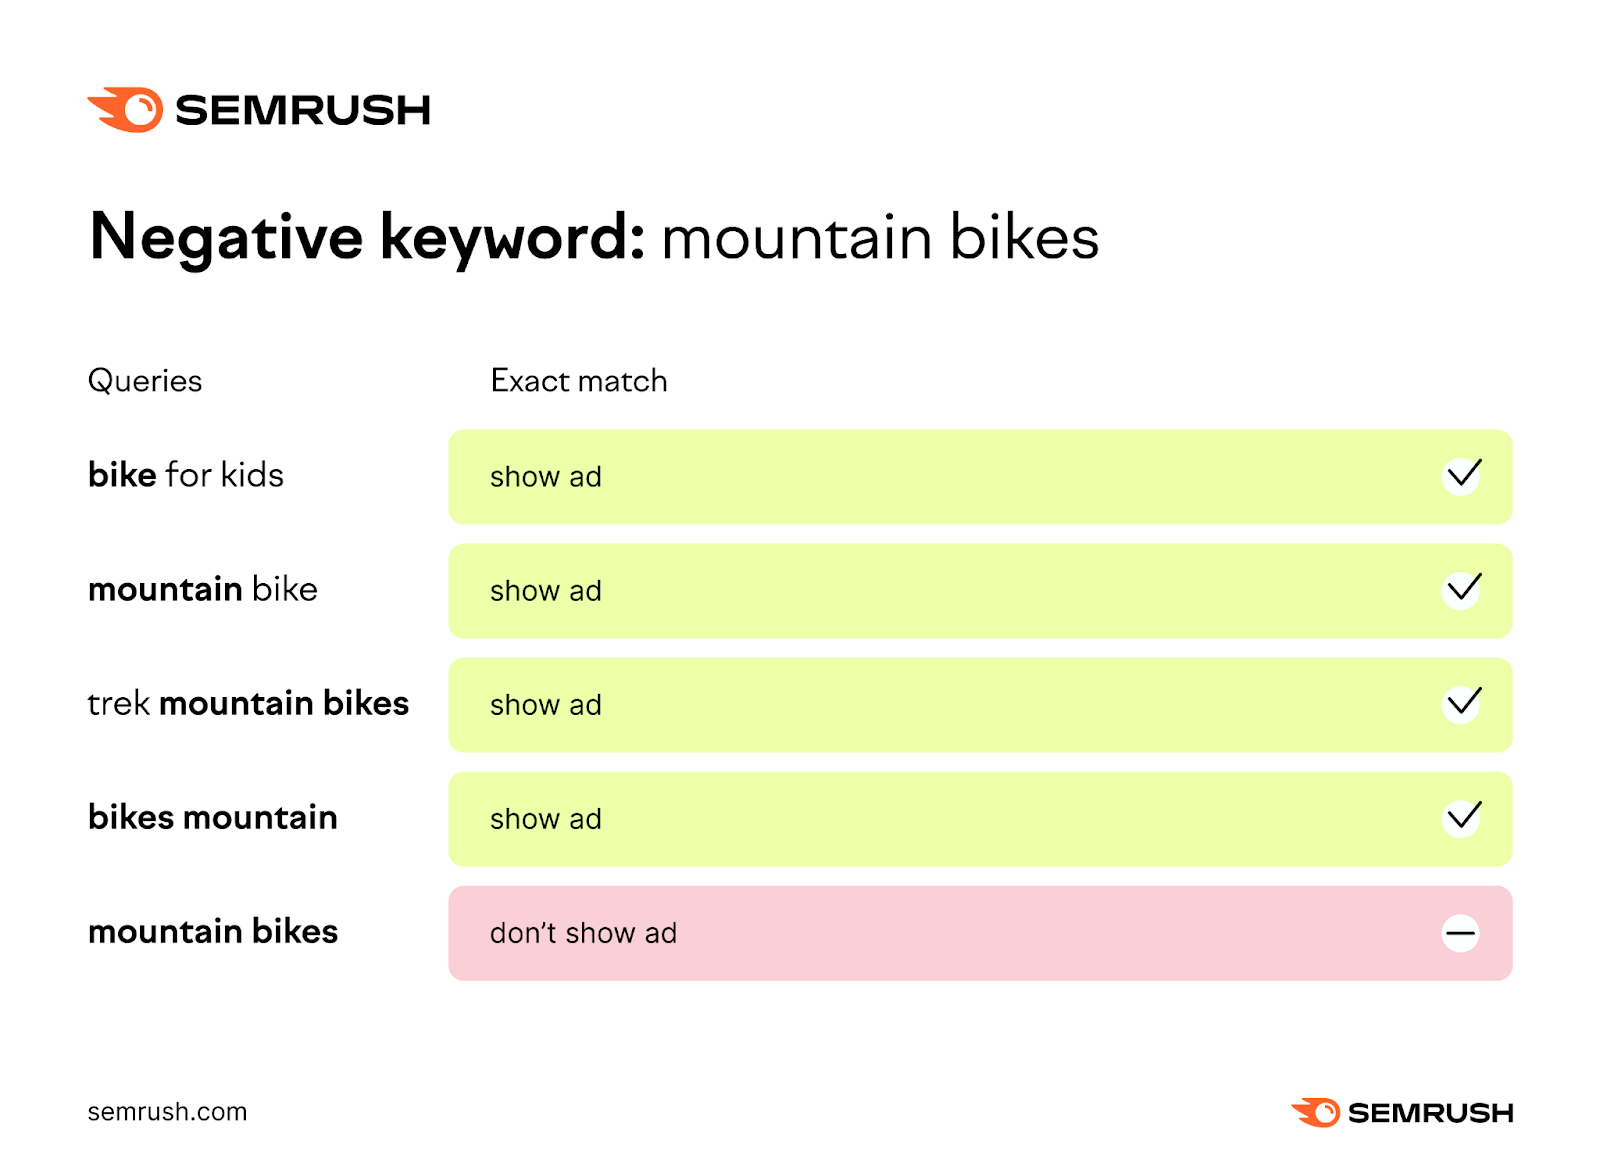 Negative keyword example for mountain bikes. Show ad for exact match queries like bike for kids, mountain bike, trek mountain bikes. Don't show an ad for the exact match keyword mountain bikes.